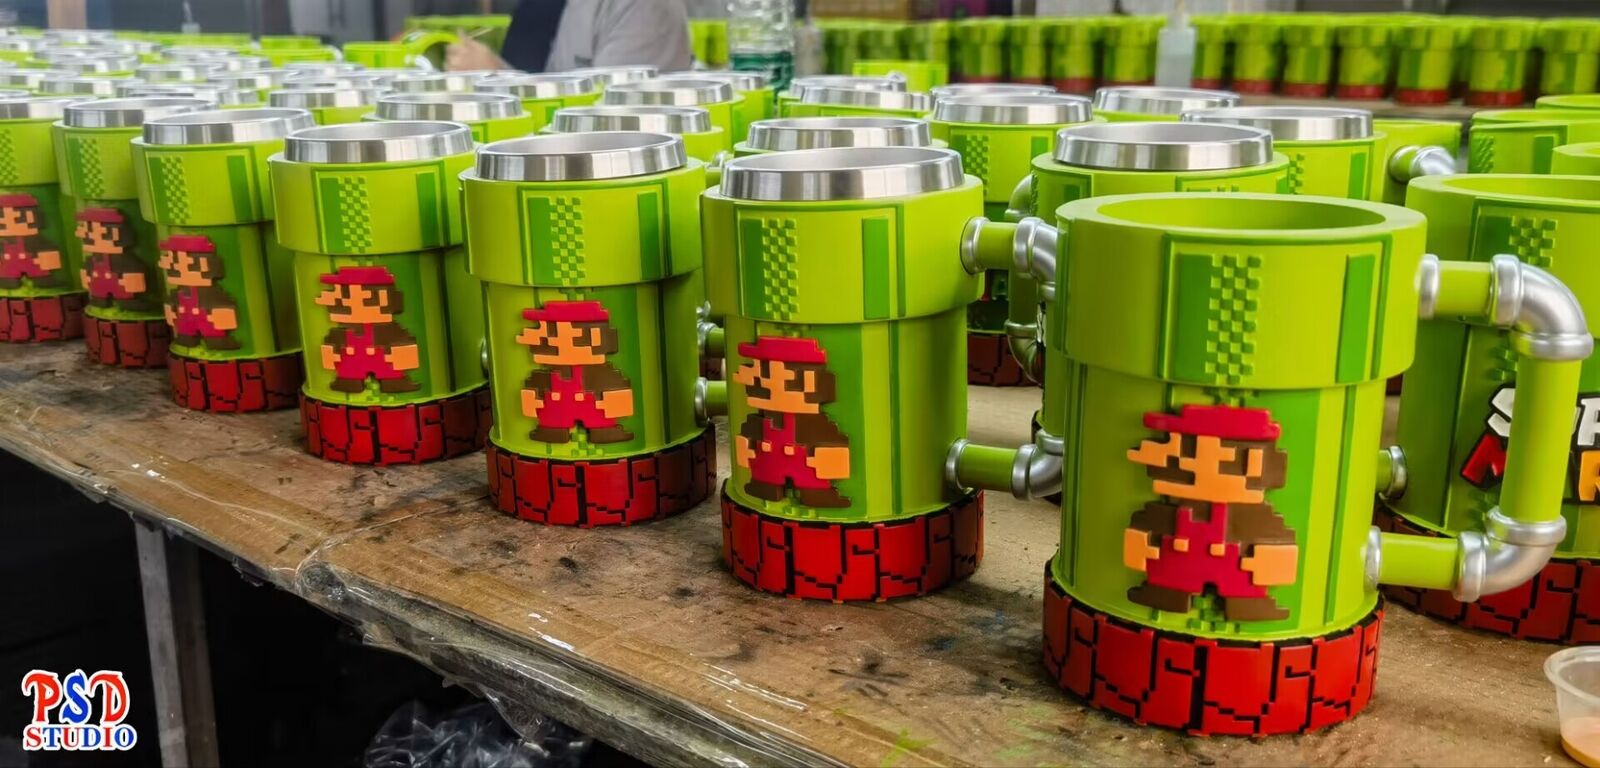 PSD STUDIO Super Mario Cup Stainless Steel 15cm 400ml in stock